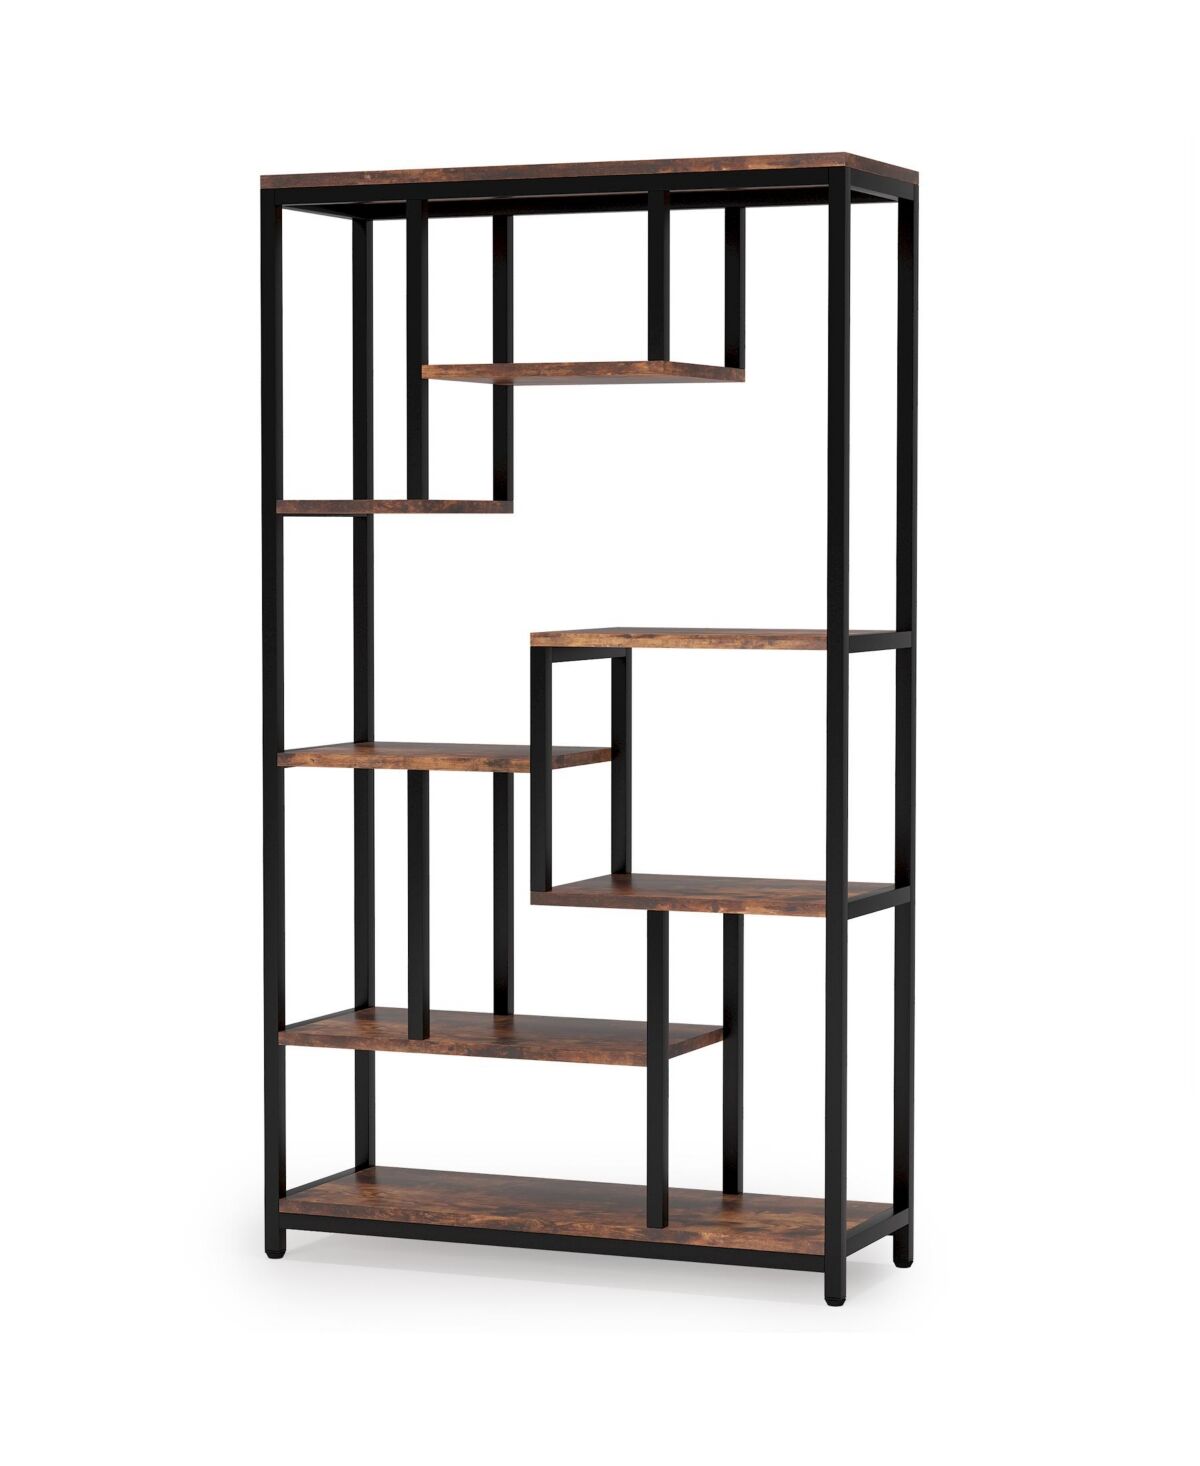 Tribesigns Tribe signs 8-Shelves Staggered Bookshelf, Industrial 70.8-inch Tall Bookshelf Bookcase for Home Office, Rustic Brown - Brown